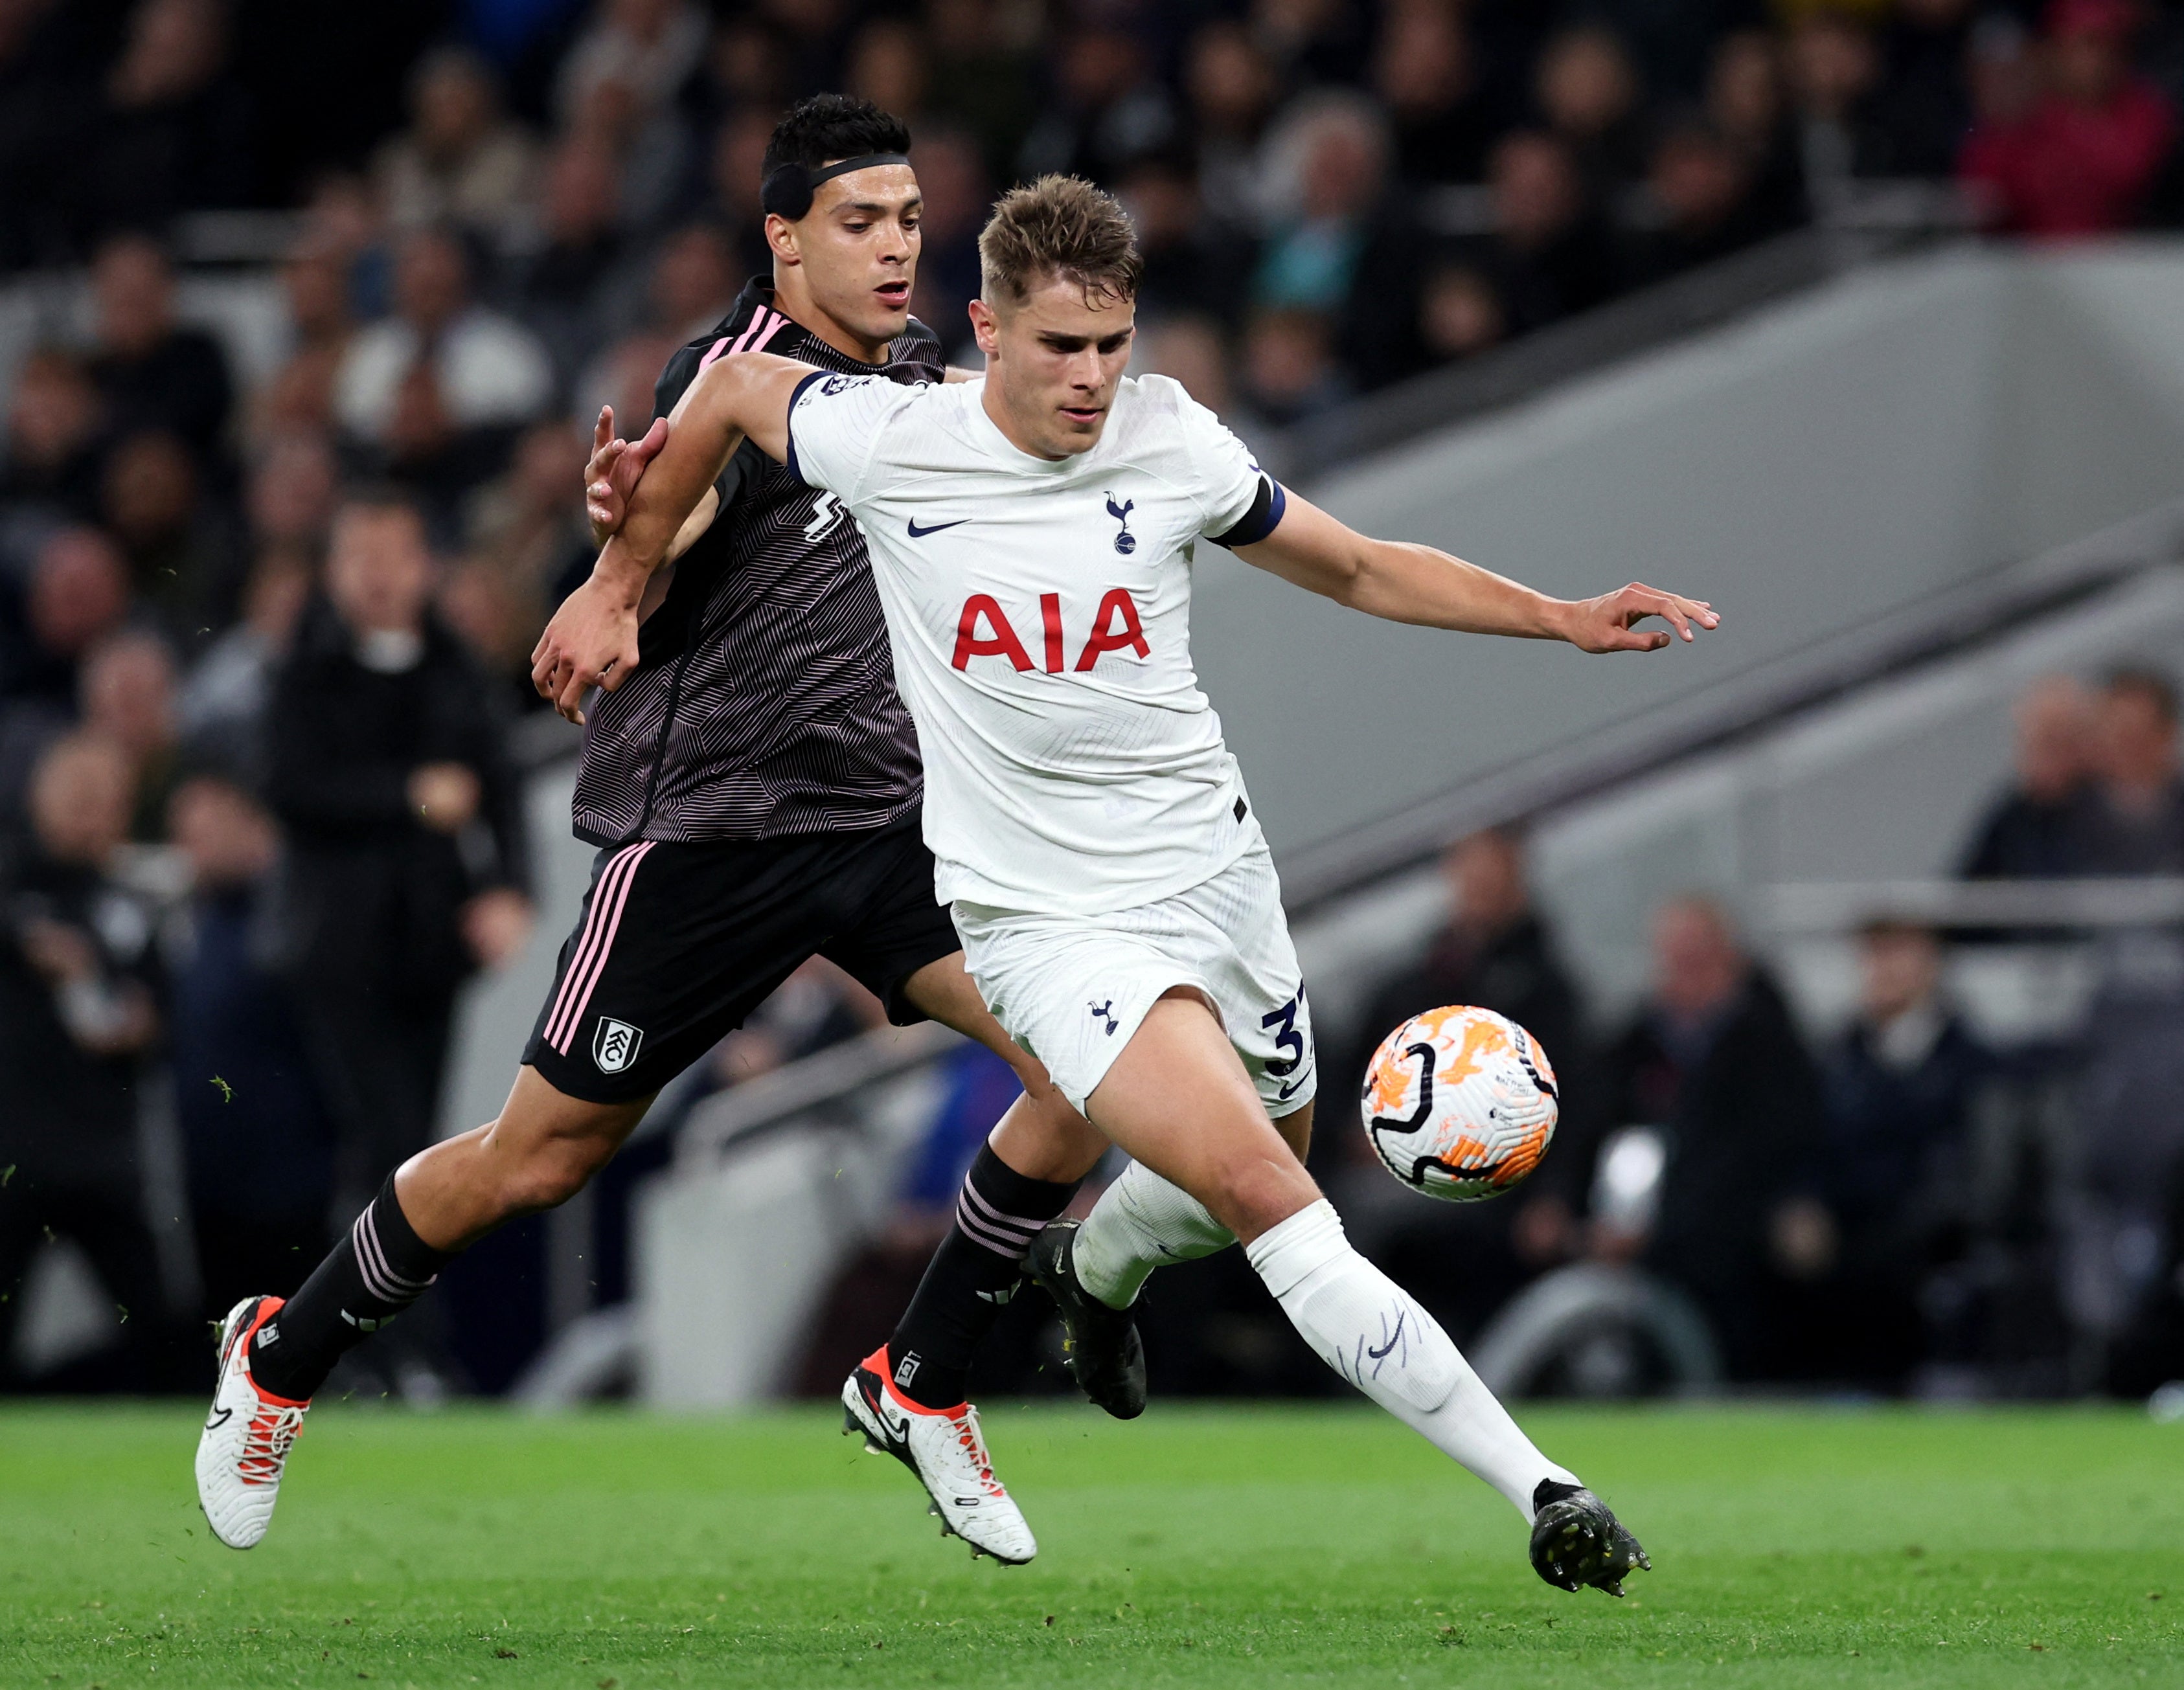 Micky van de Ven won a crucial challenge for the opening Tottenham goal